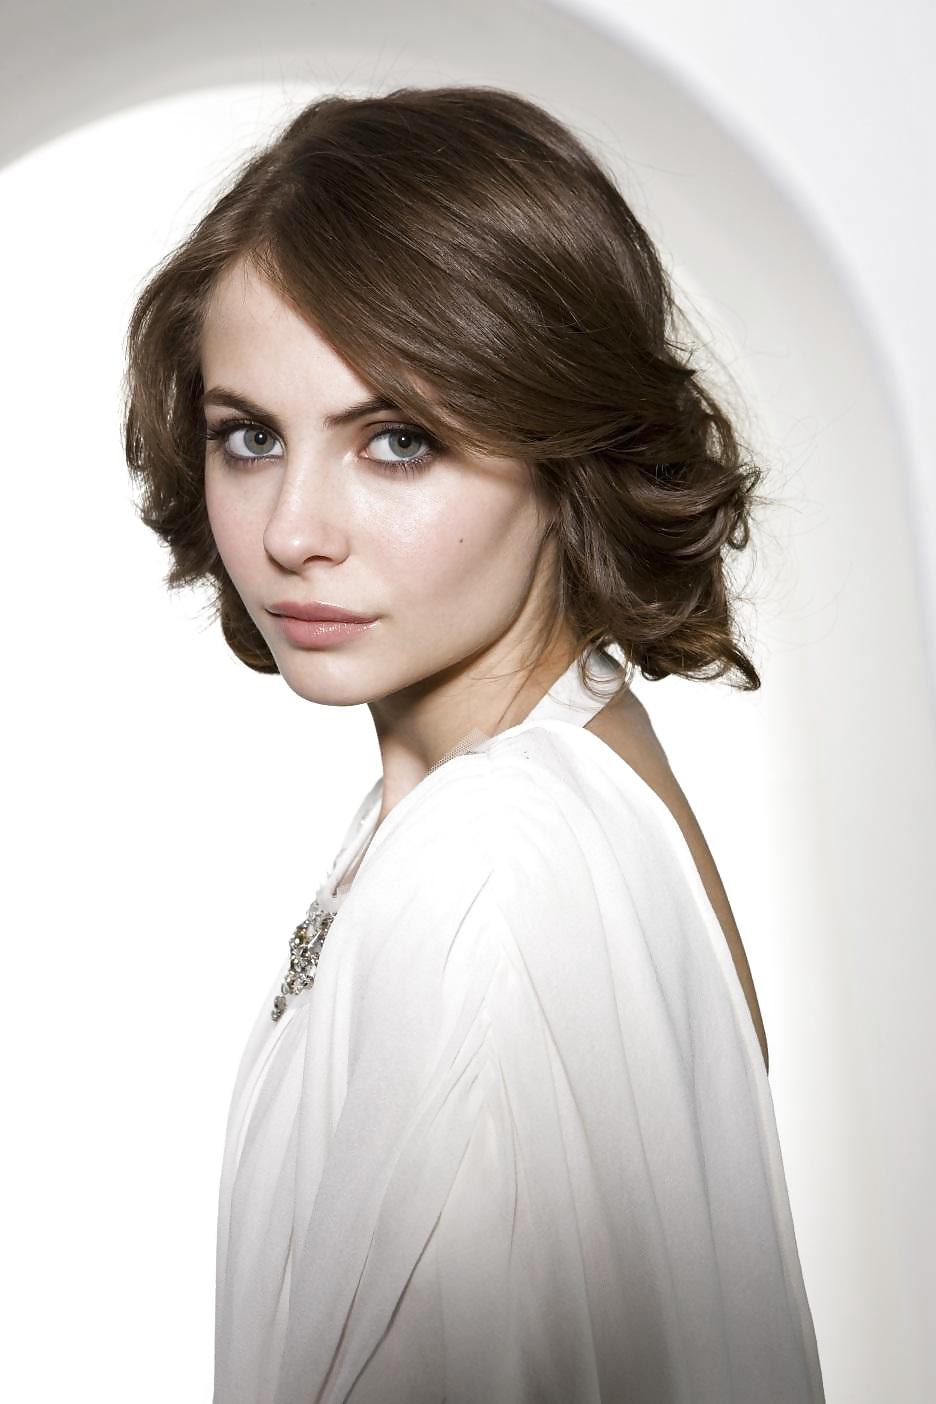 Willa holland (hotest young celebrity) for fan :) 
 #15420203